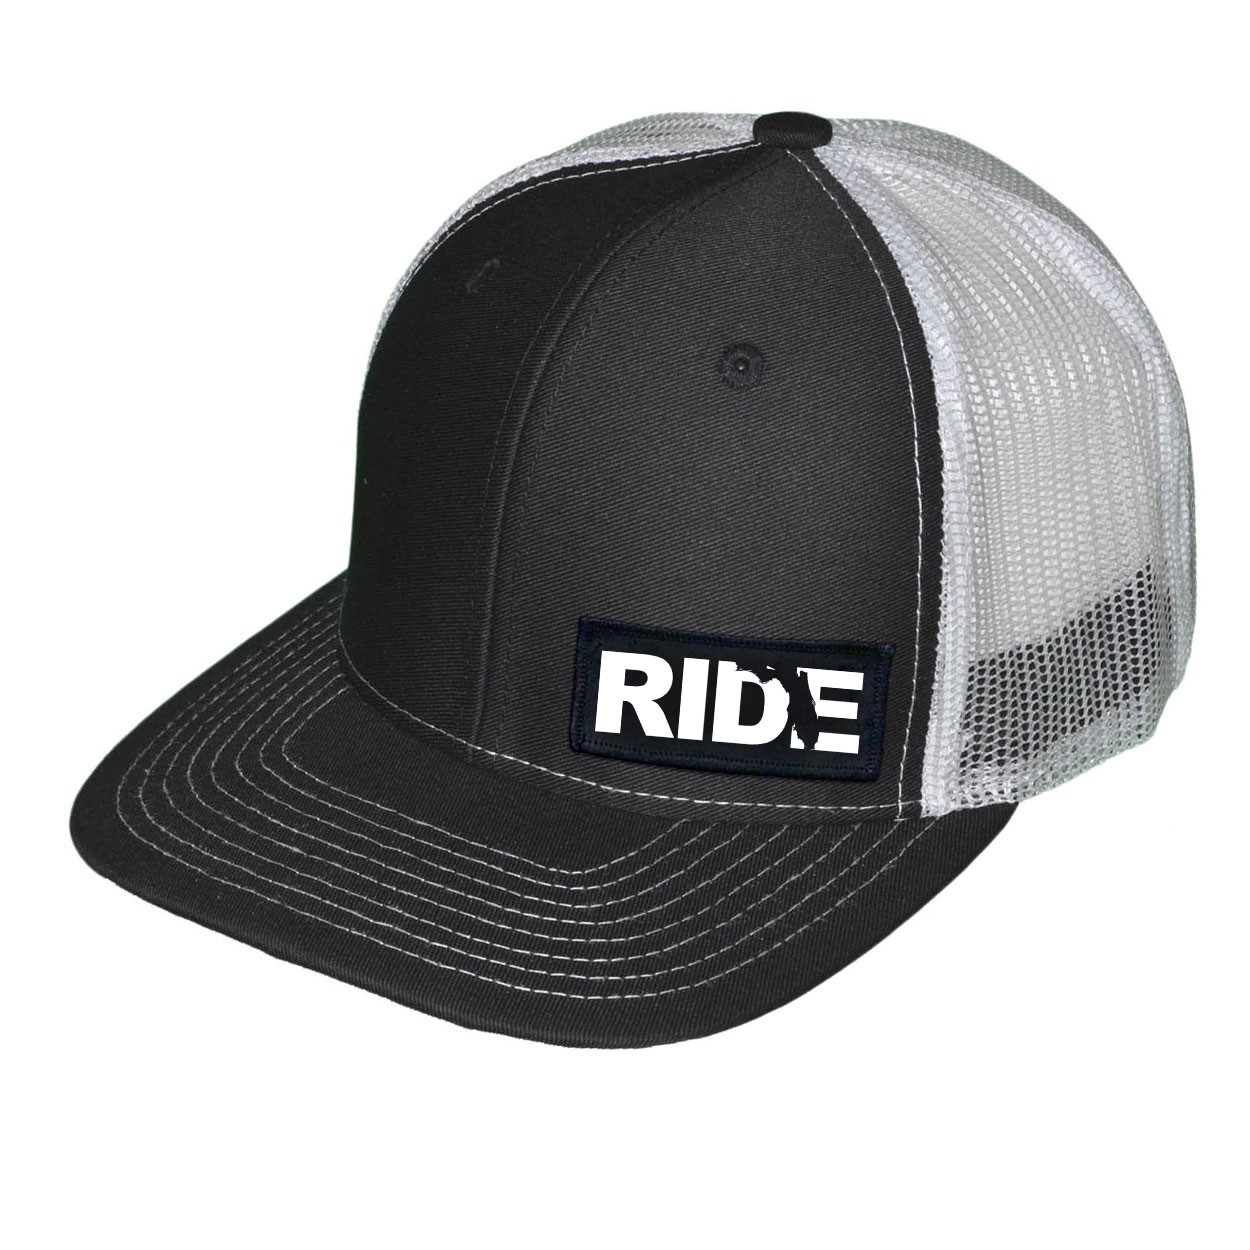 Ride Florida Night Out Woven Patch Snapback Trucker Hat Black/White (White Logo)